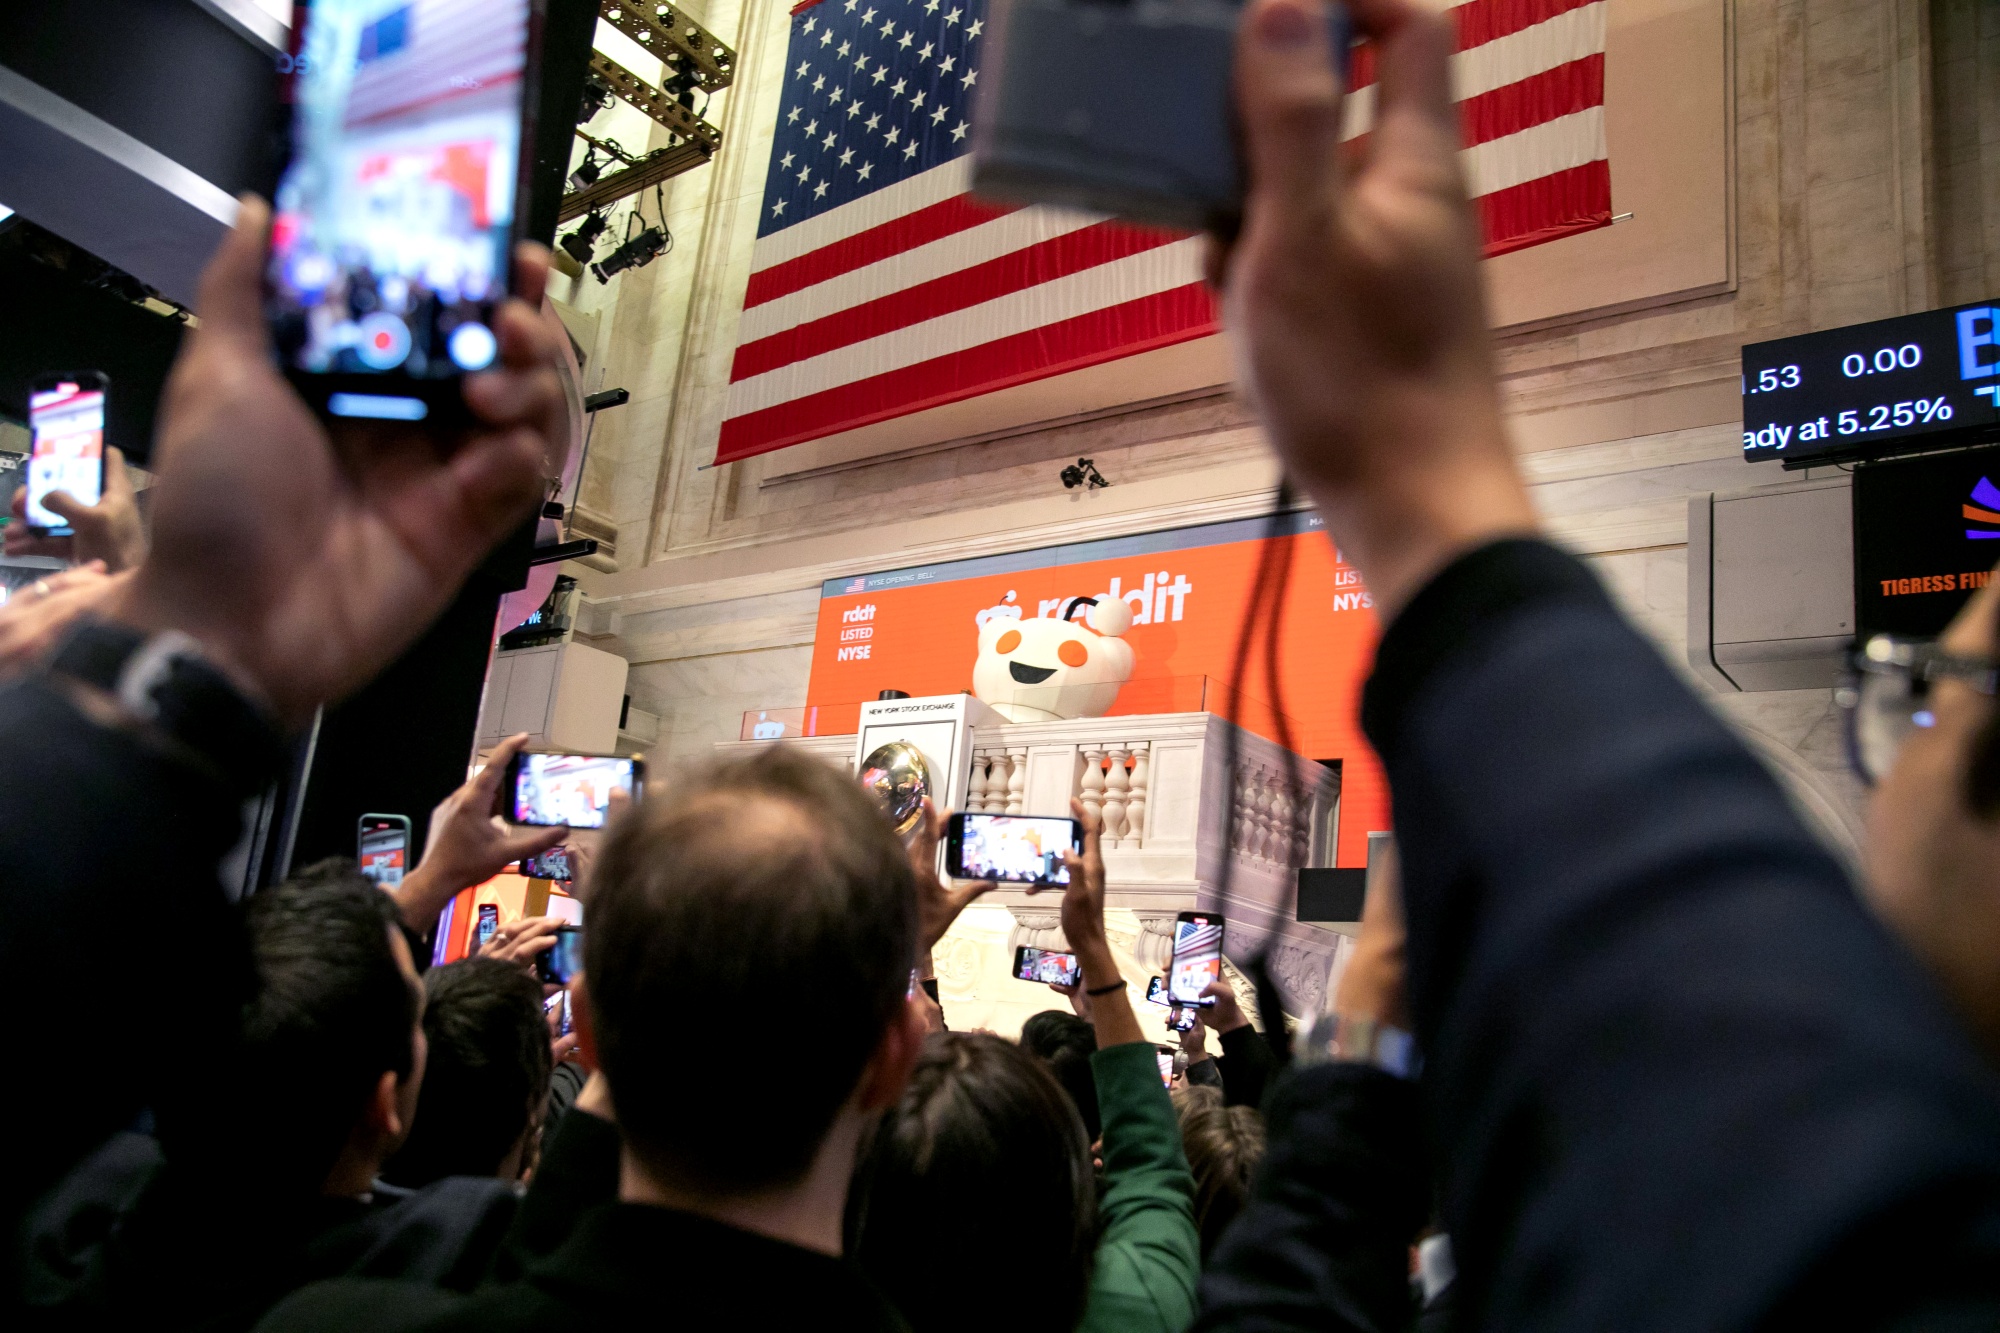 Snoo, mascot of Reddit Inc., rings the opening bell on the floor of the New York Stock Exchange.